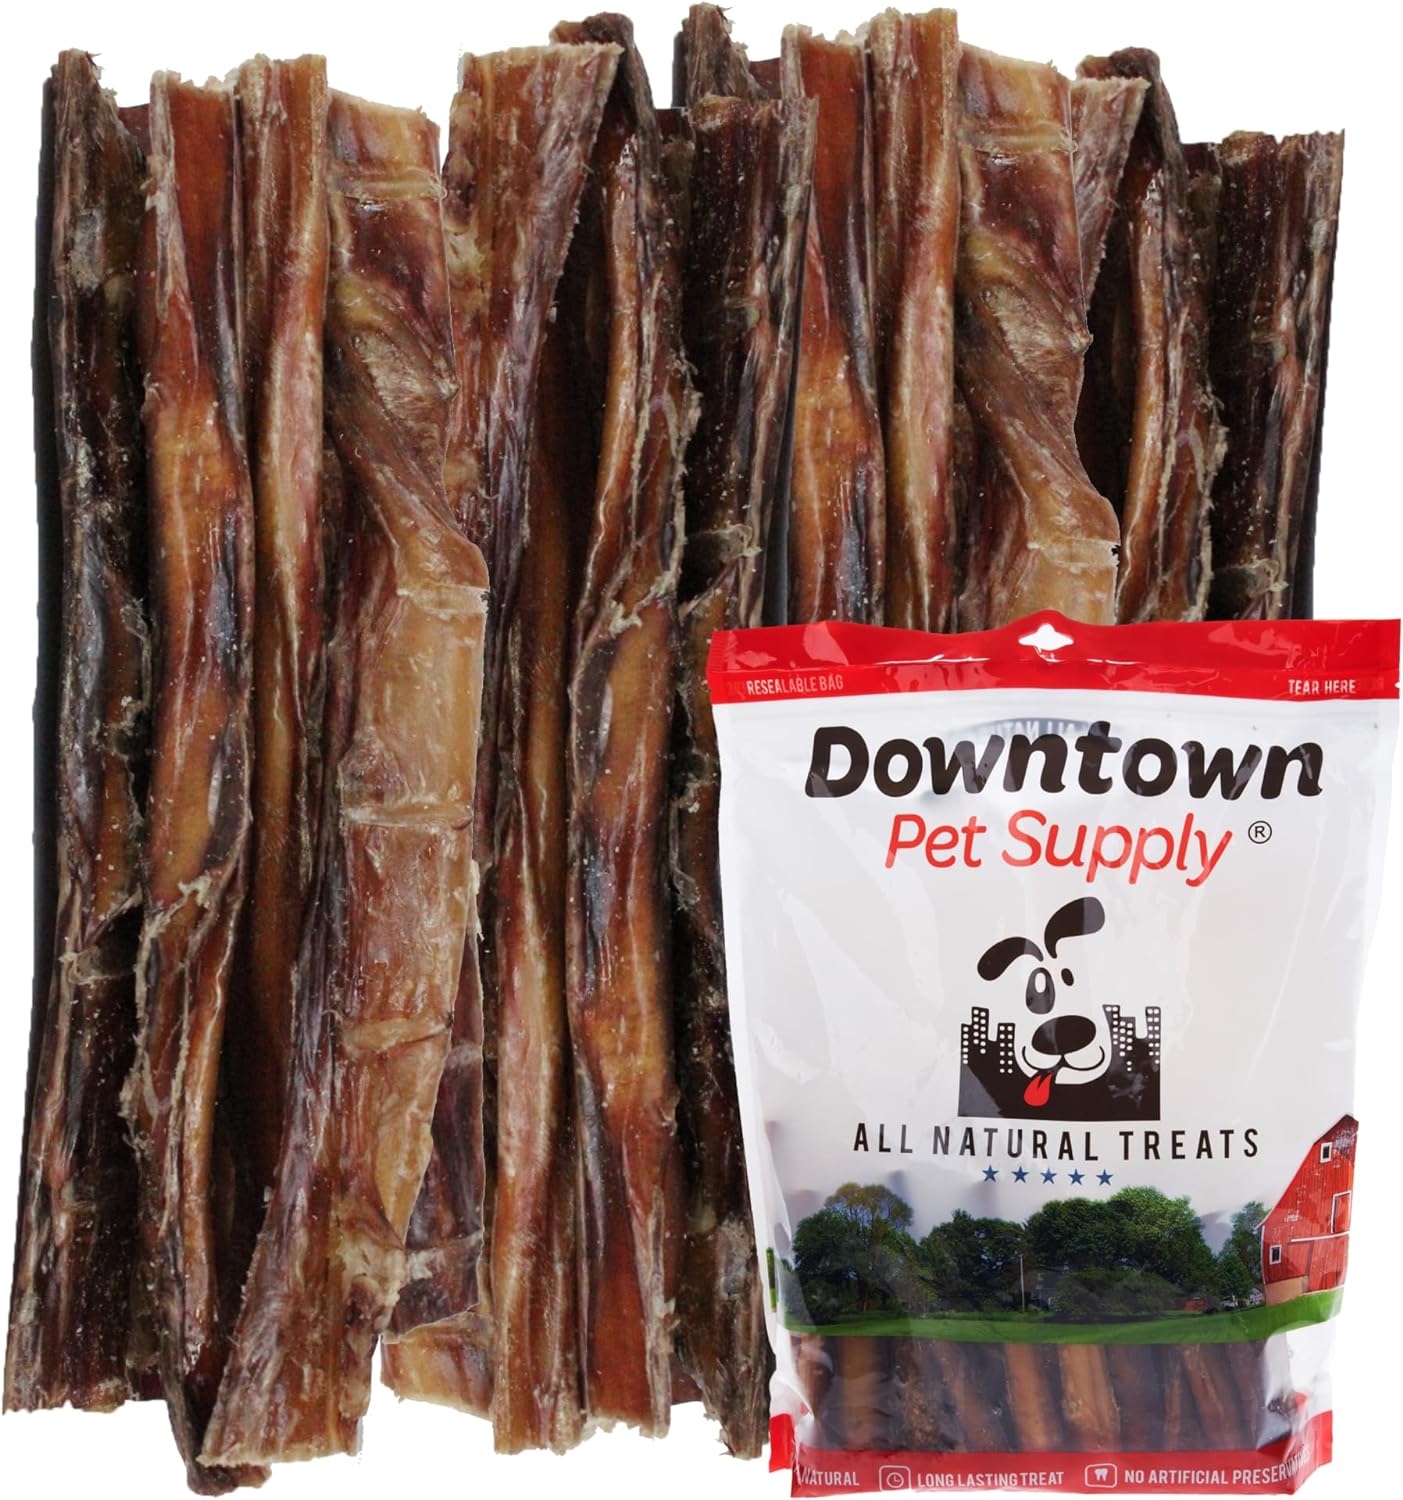 Downtown Pet Supply 12-inch Bully Sticks for Dogs, 5 LB - USA Sourced, No Hide Dog Chews Long Lasting and Non-Splintering - Nutrient-Rich, Single Ingredient and Odor Free Bully Sticks for Dogs